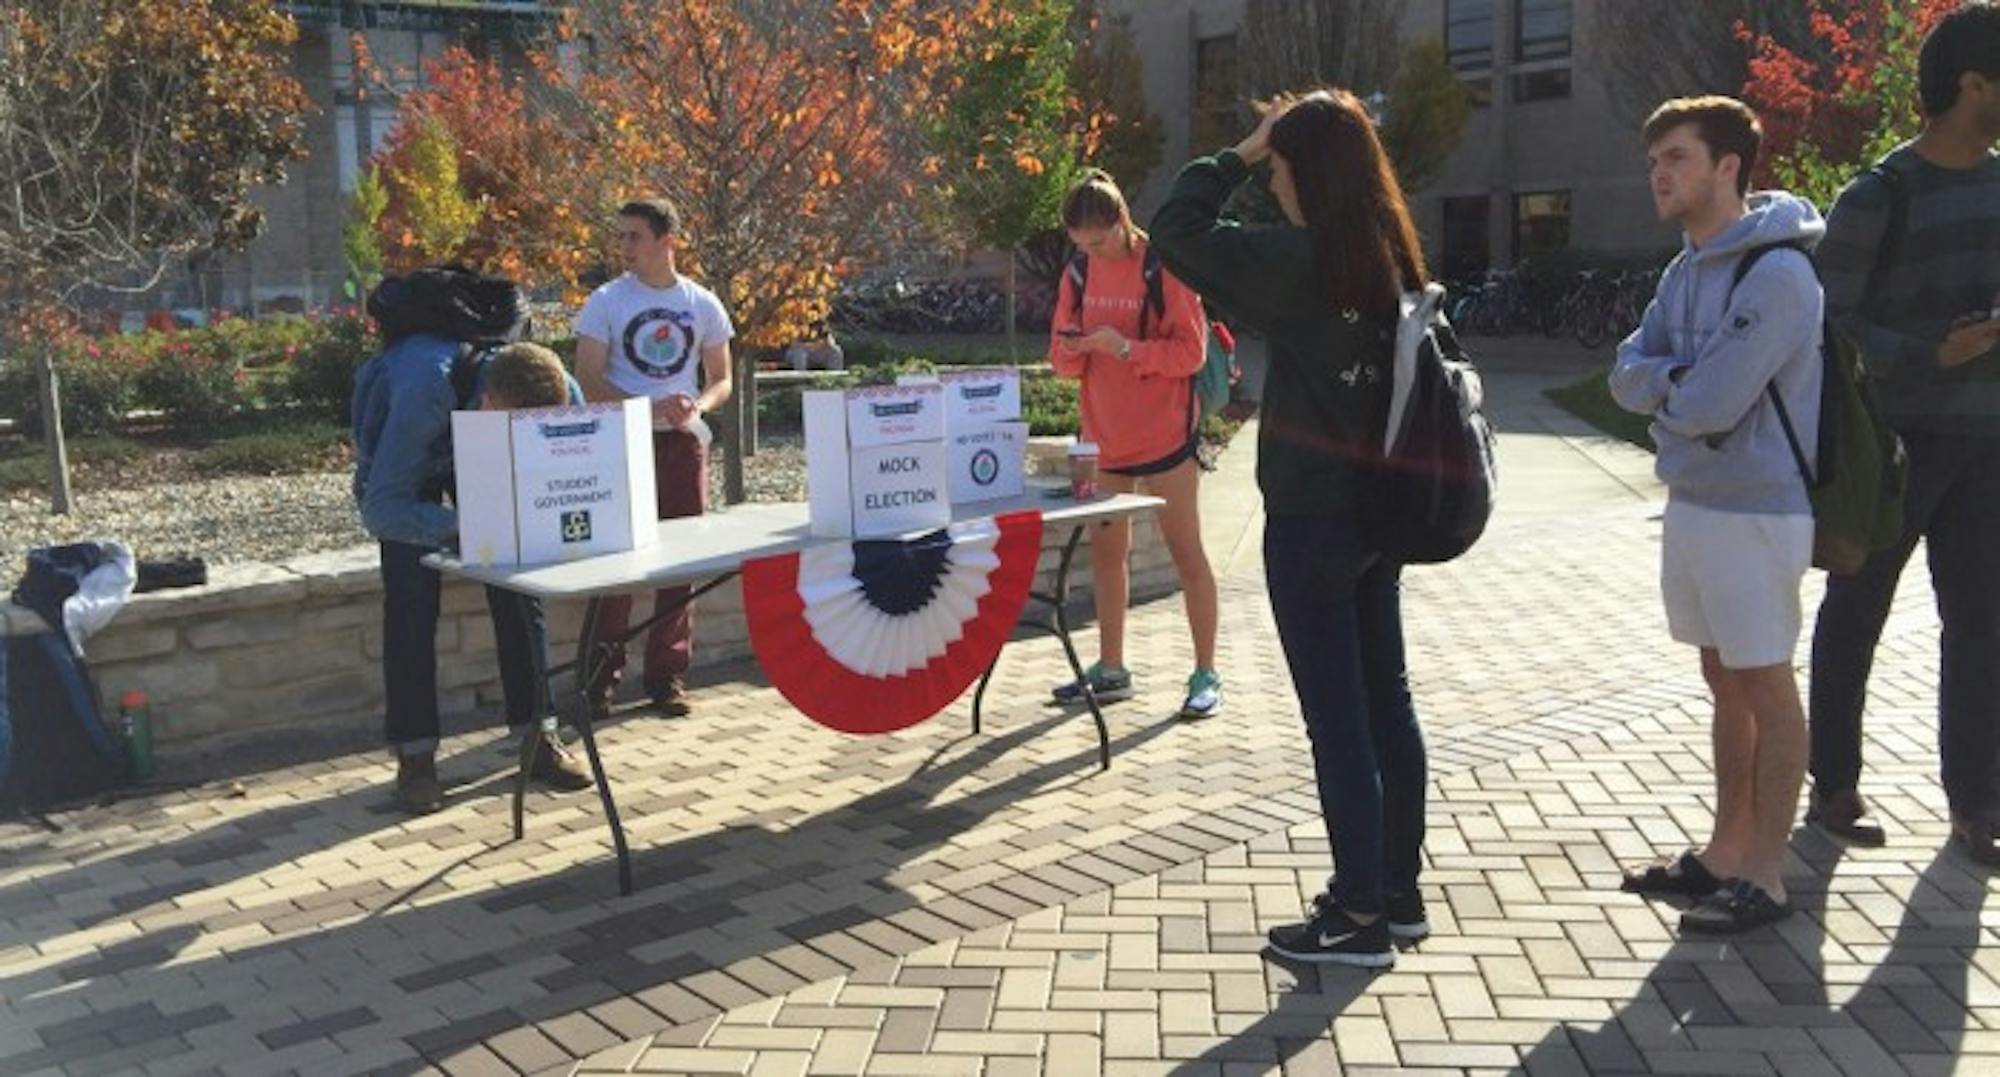 Students cast their ballots for presidential candidates in the mock election Tuesday afternoon outside DeBartolo Hall. NDVotes stationed three other polling booths across campus — in LaFortune Student Center, South Dining Hall and Geddes Hall — where students could vote electronically.